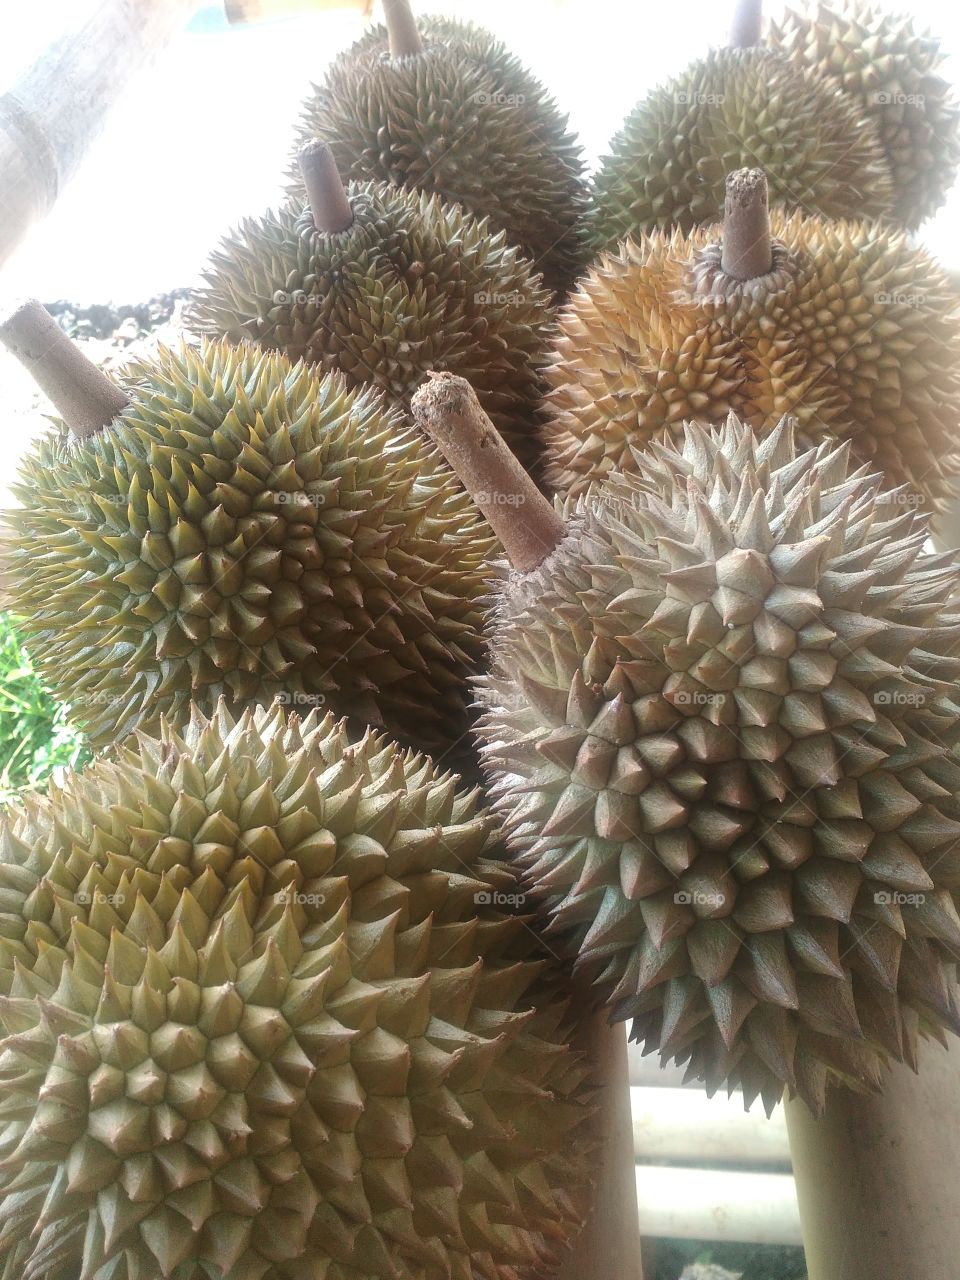 durian is one of the a delicious fruits.in Indonesia found many variety of this fruits.